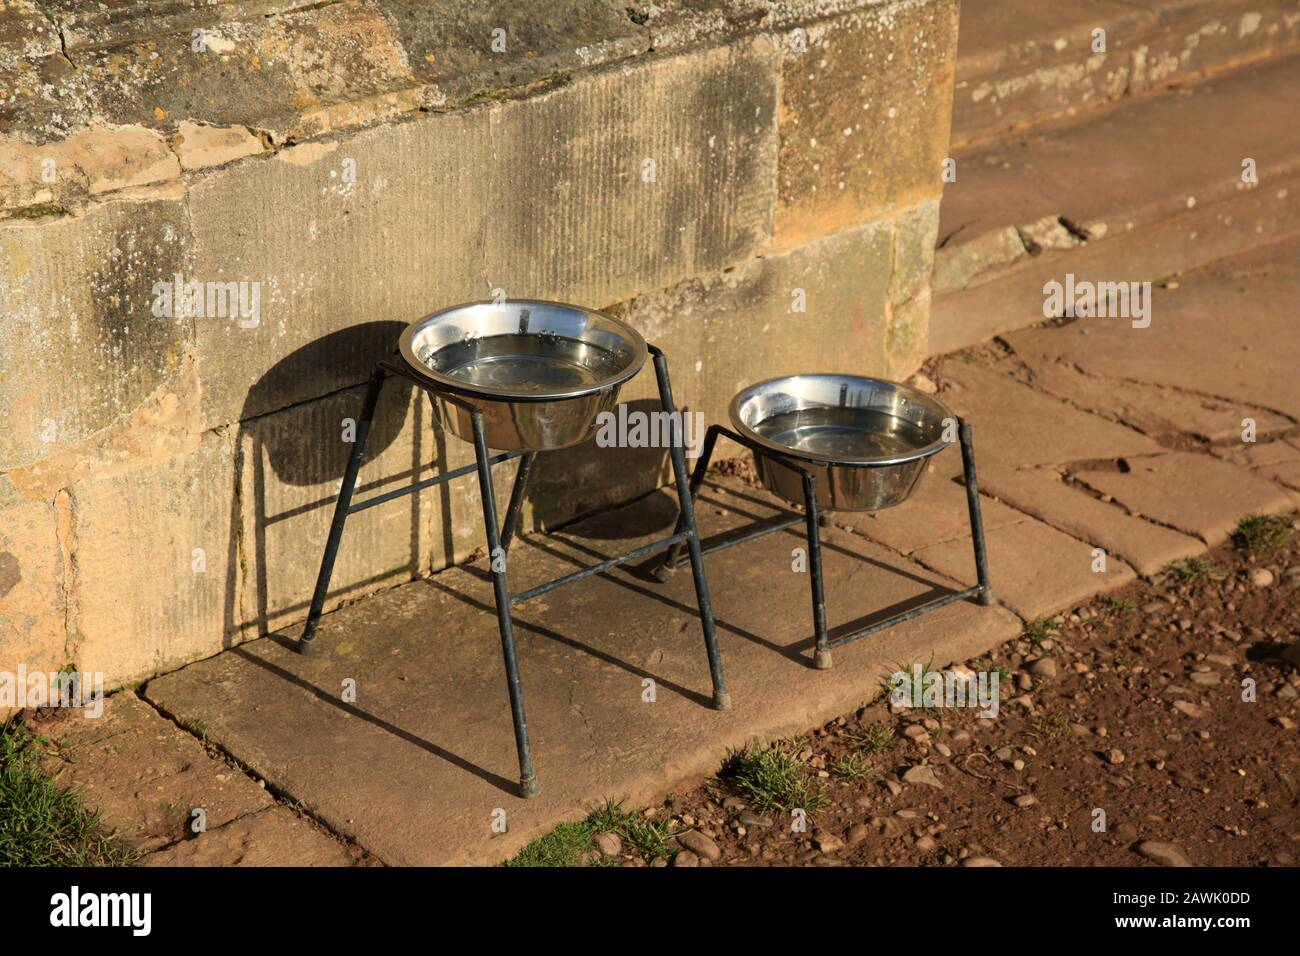 Water bowls provided for Dogs at Croome court, Worcestershire, England, UK. Stock Photo